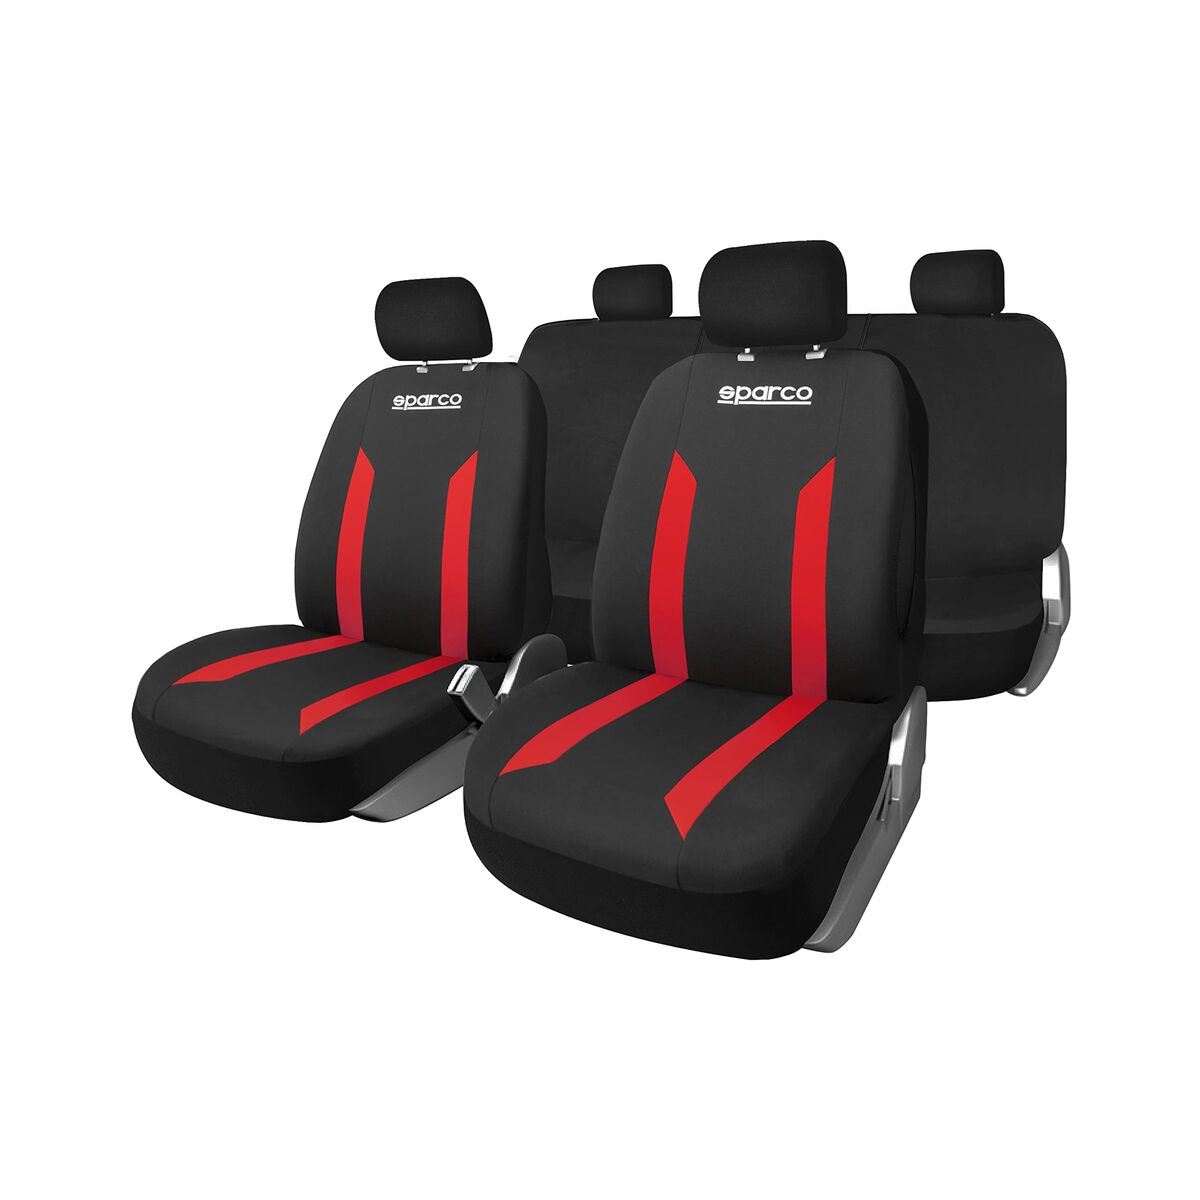 SPARCO Seat Covers Sabbia (Black & Red)